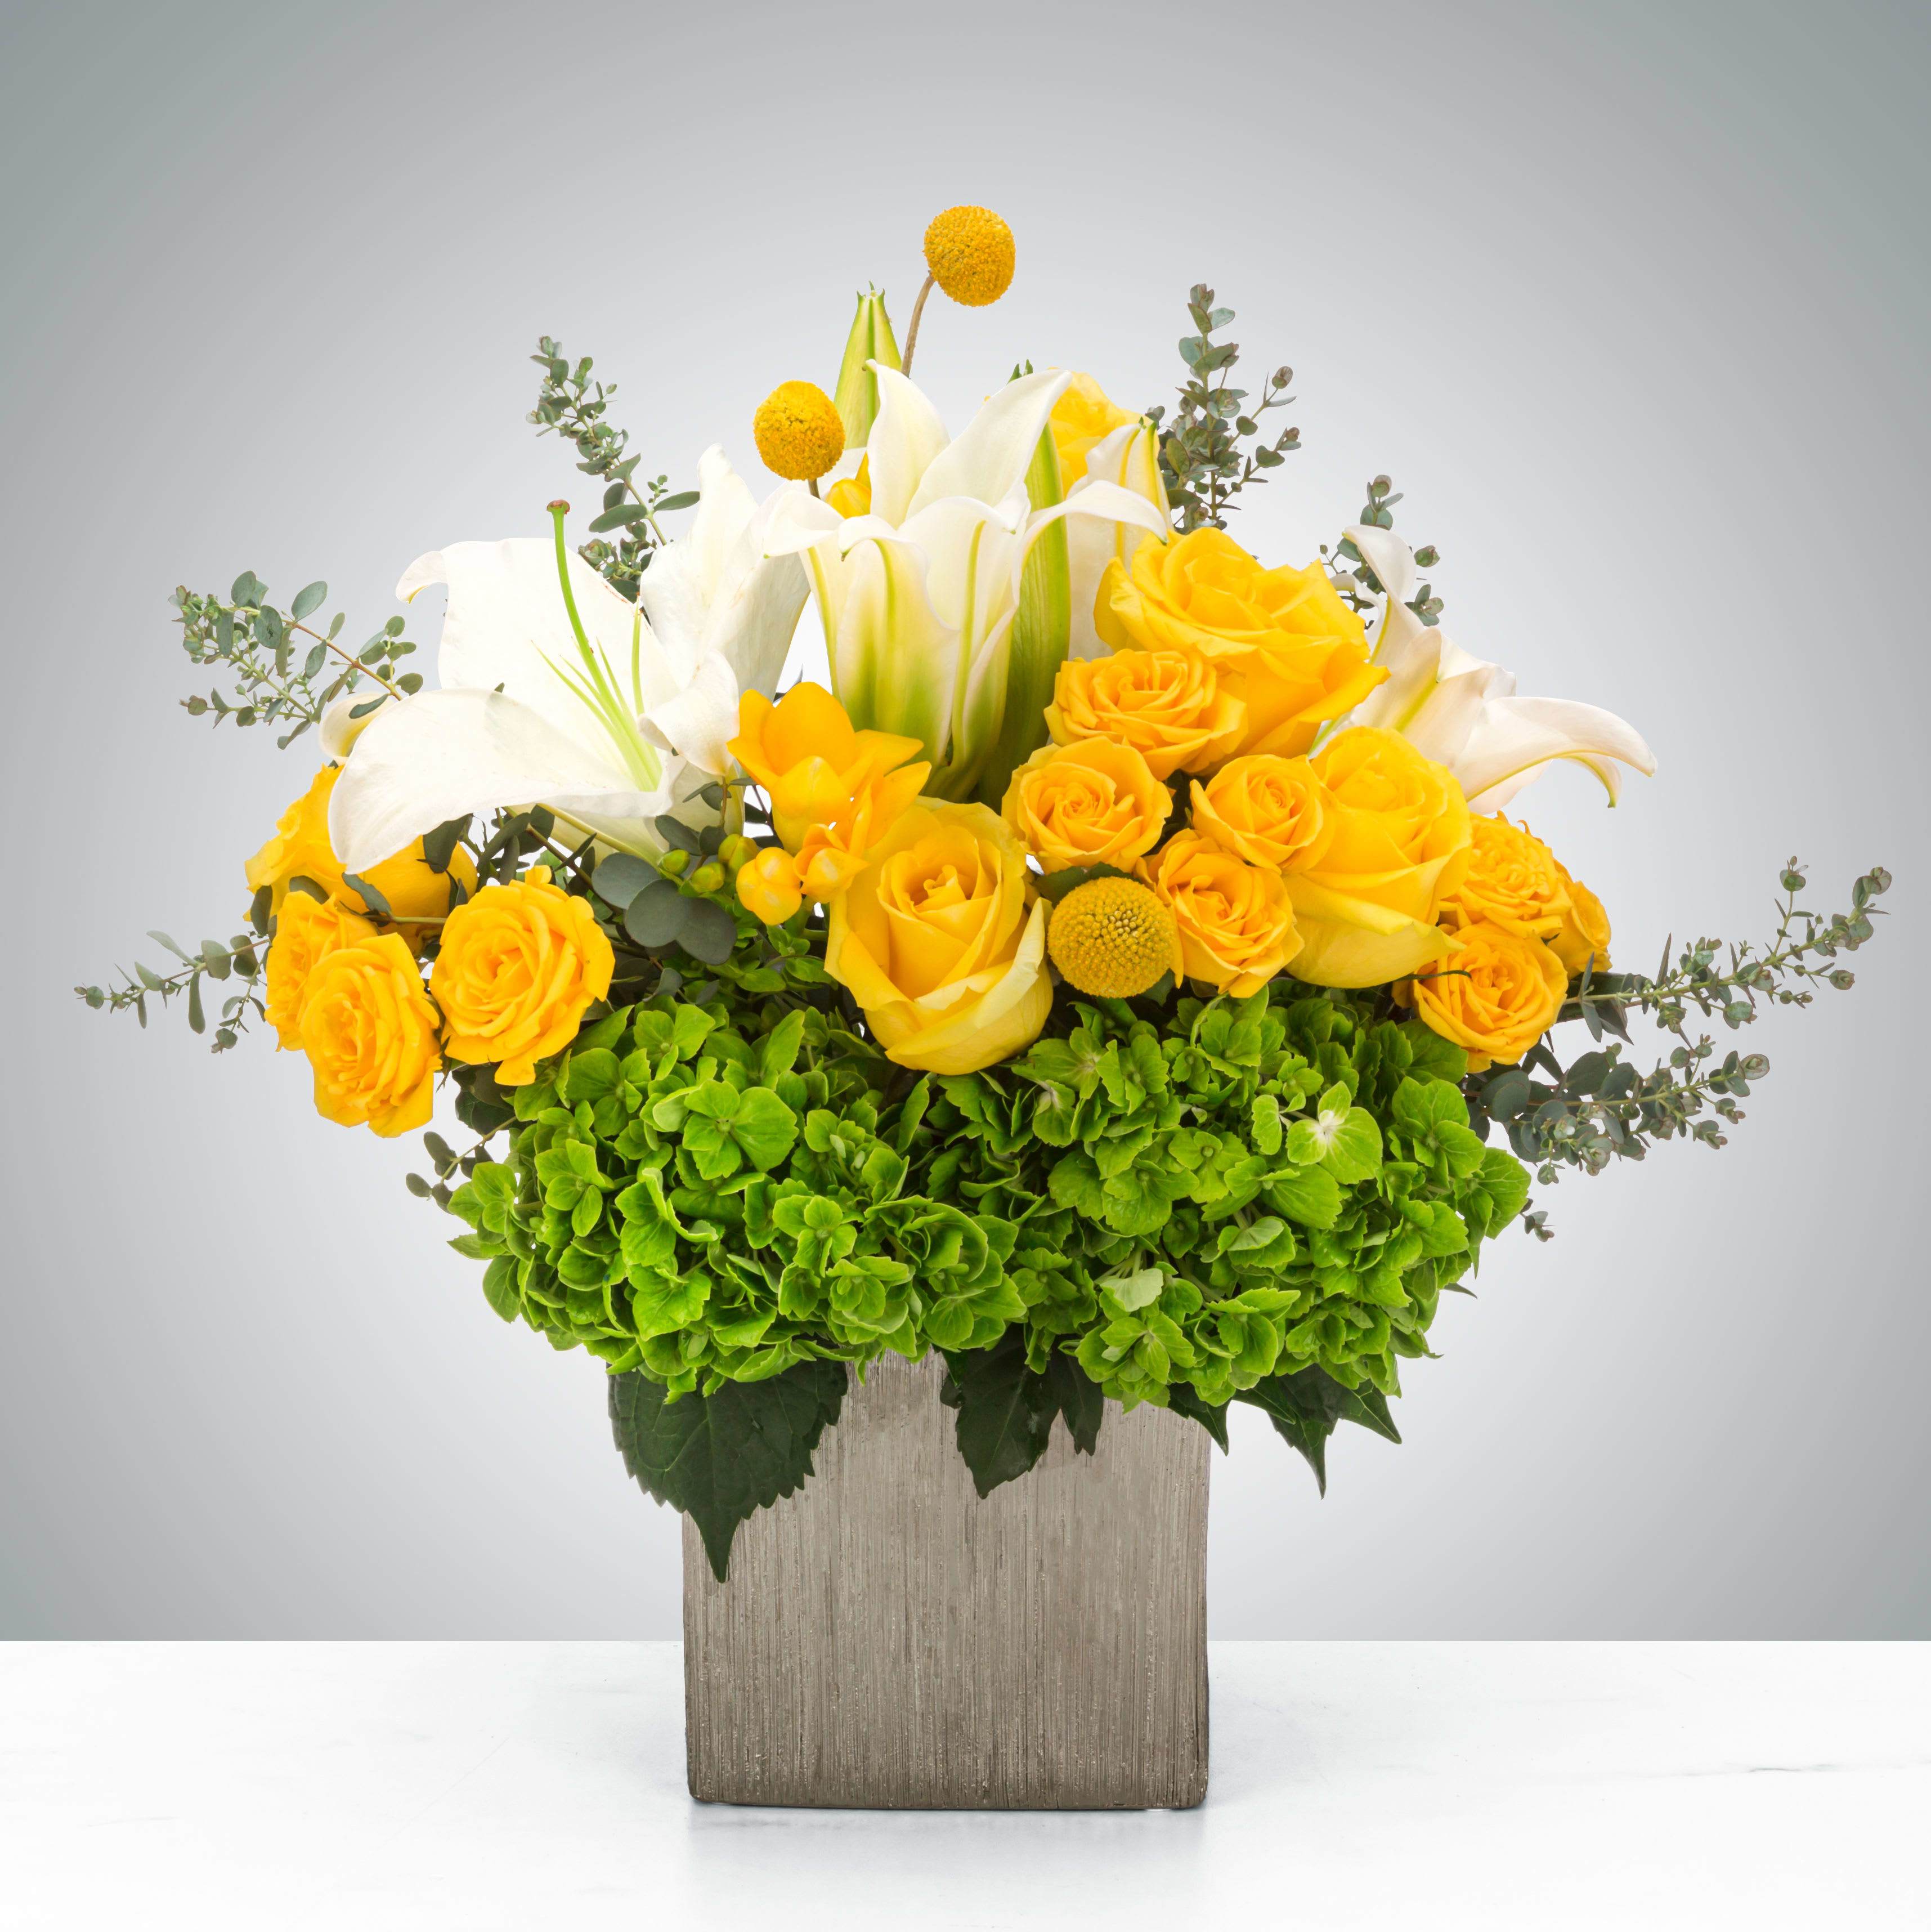 Silver Sunshine  - A stunning arrangement filled with white lilies and yellow roses on a bed of lush green hydrangeas accented with fragrant eucalyptus in a keepsake cube vase. Great gift for birthday, get well, housewarming or to congratulate for a job well done! Order for same day delivery today!  Approximately 10” D